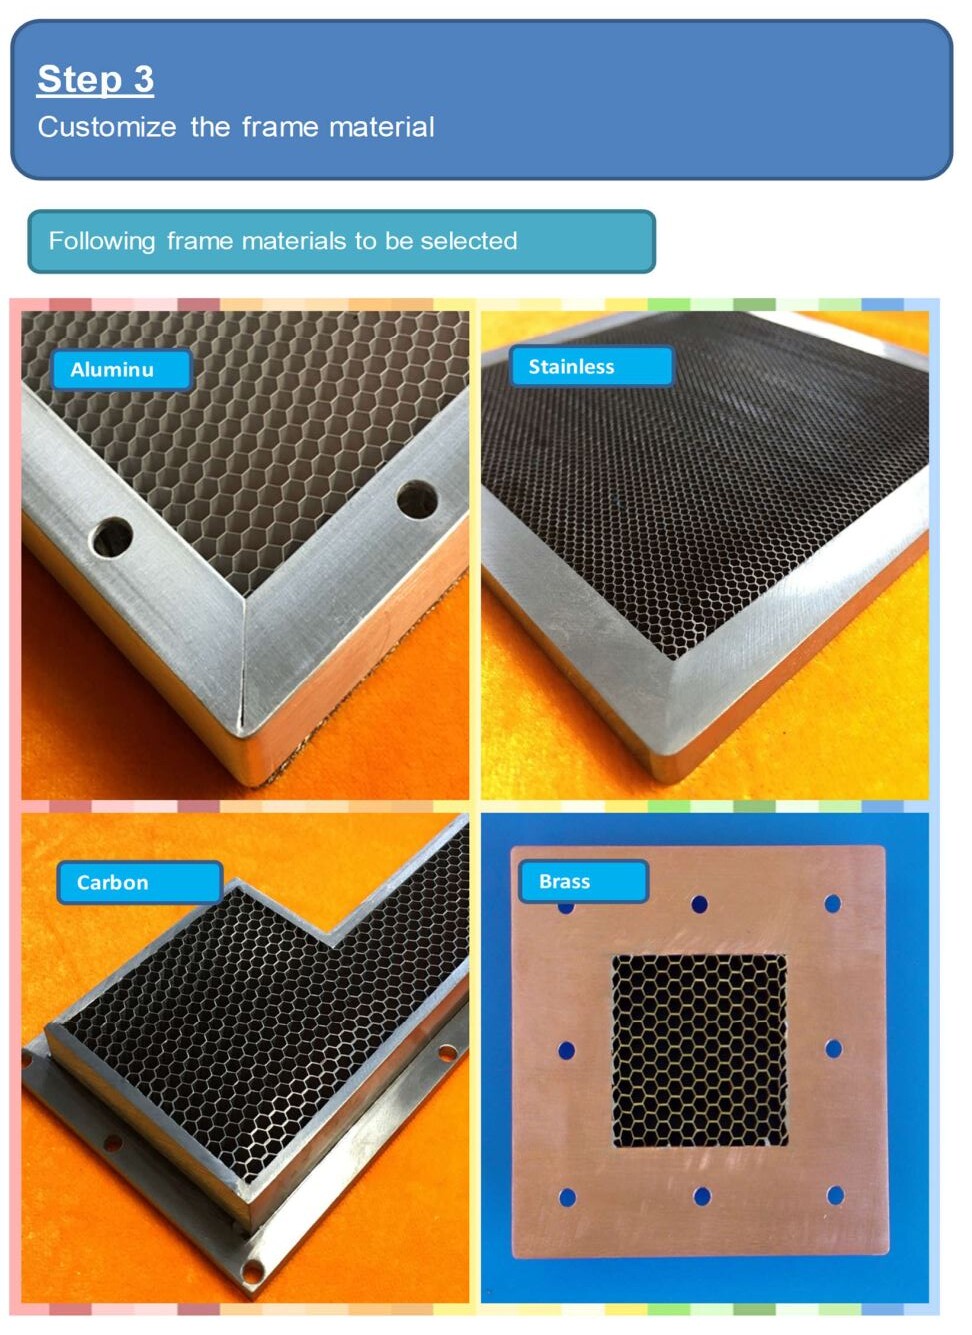 Step 3 of getting price faster of honeycomb shielding vent